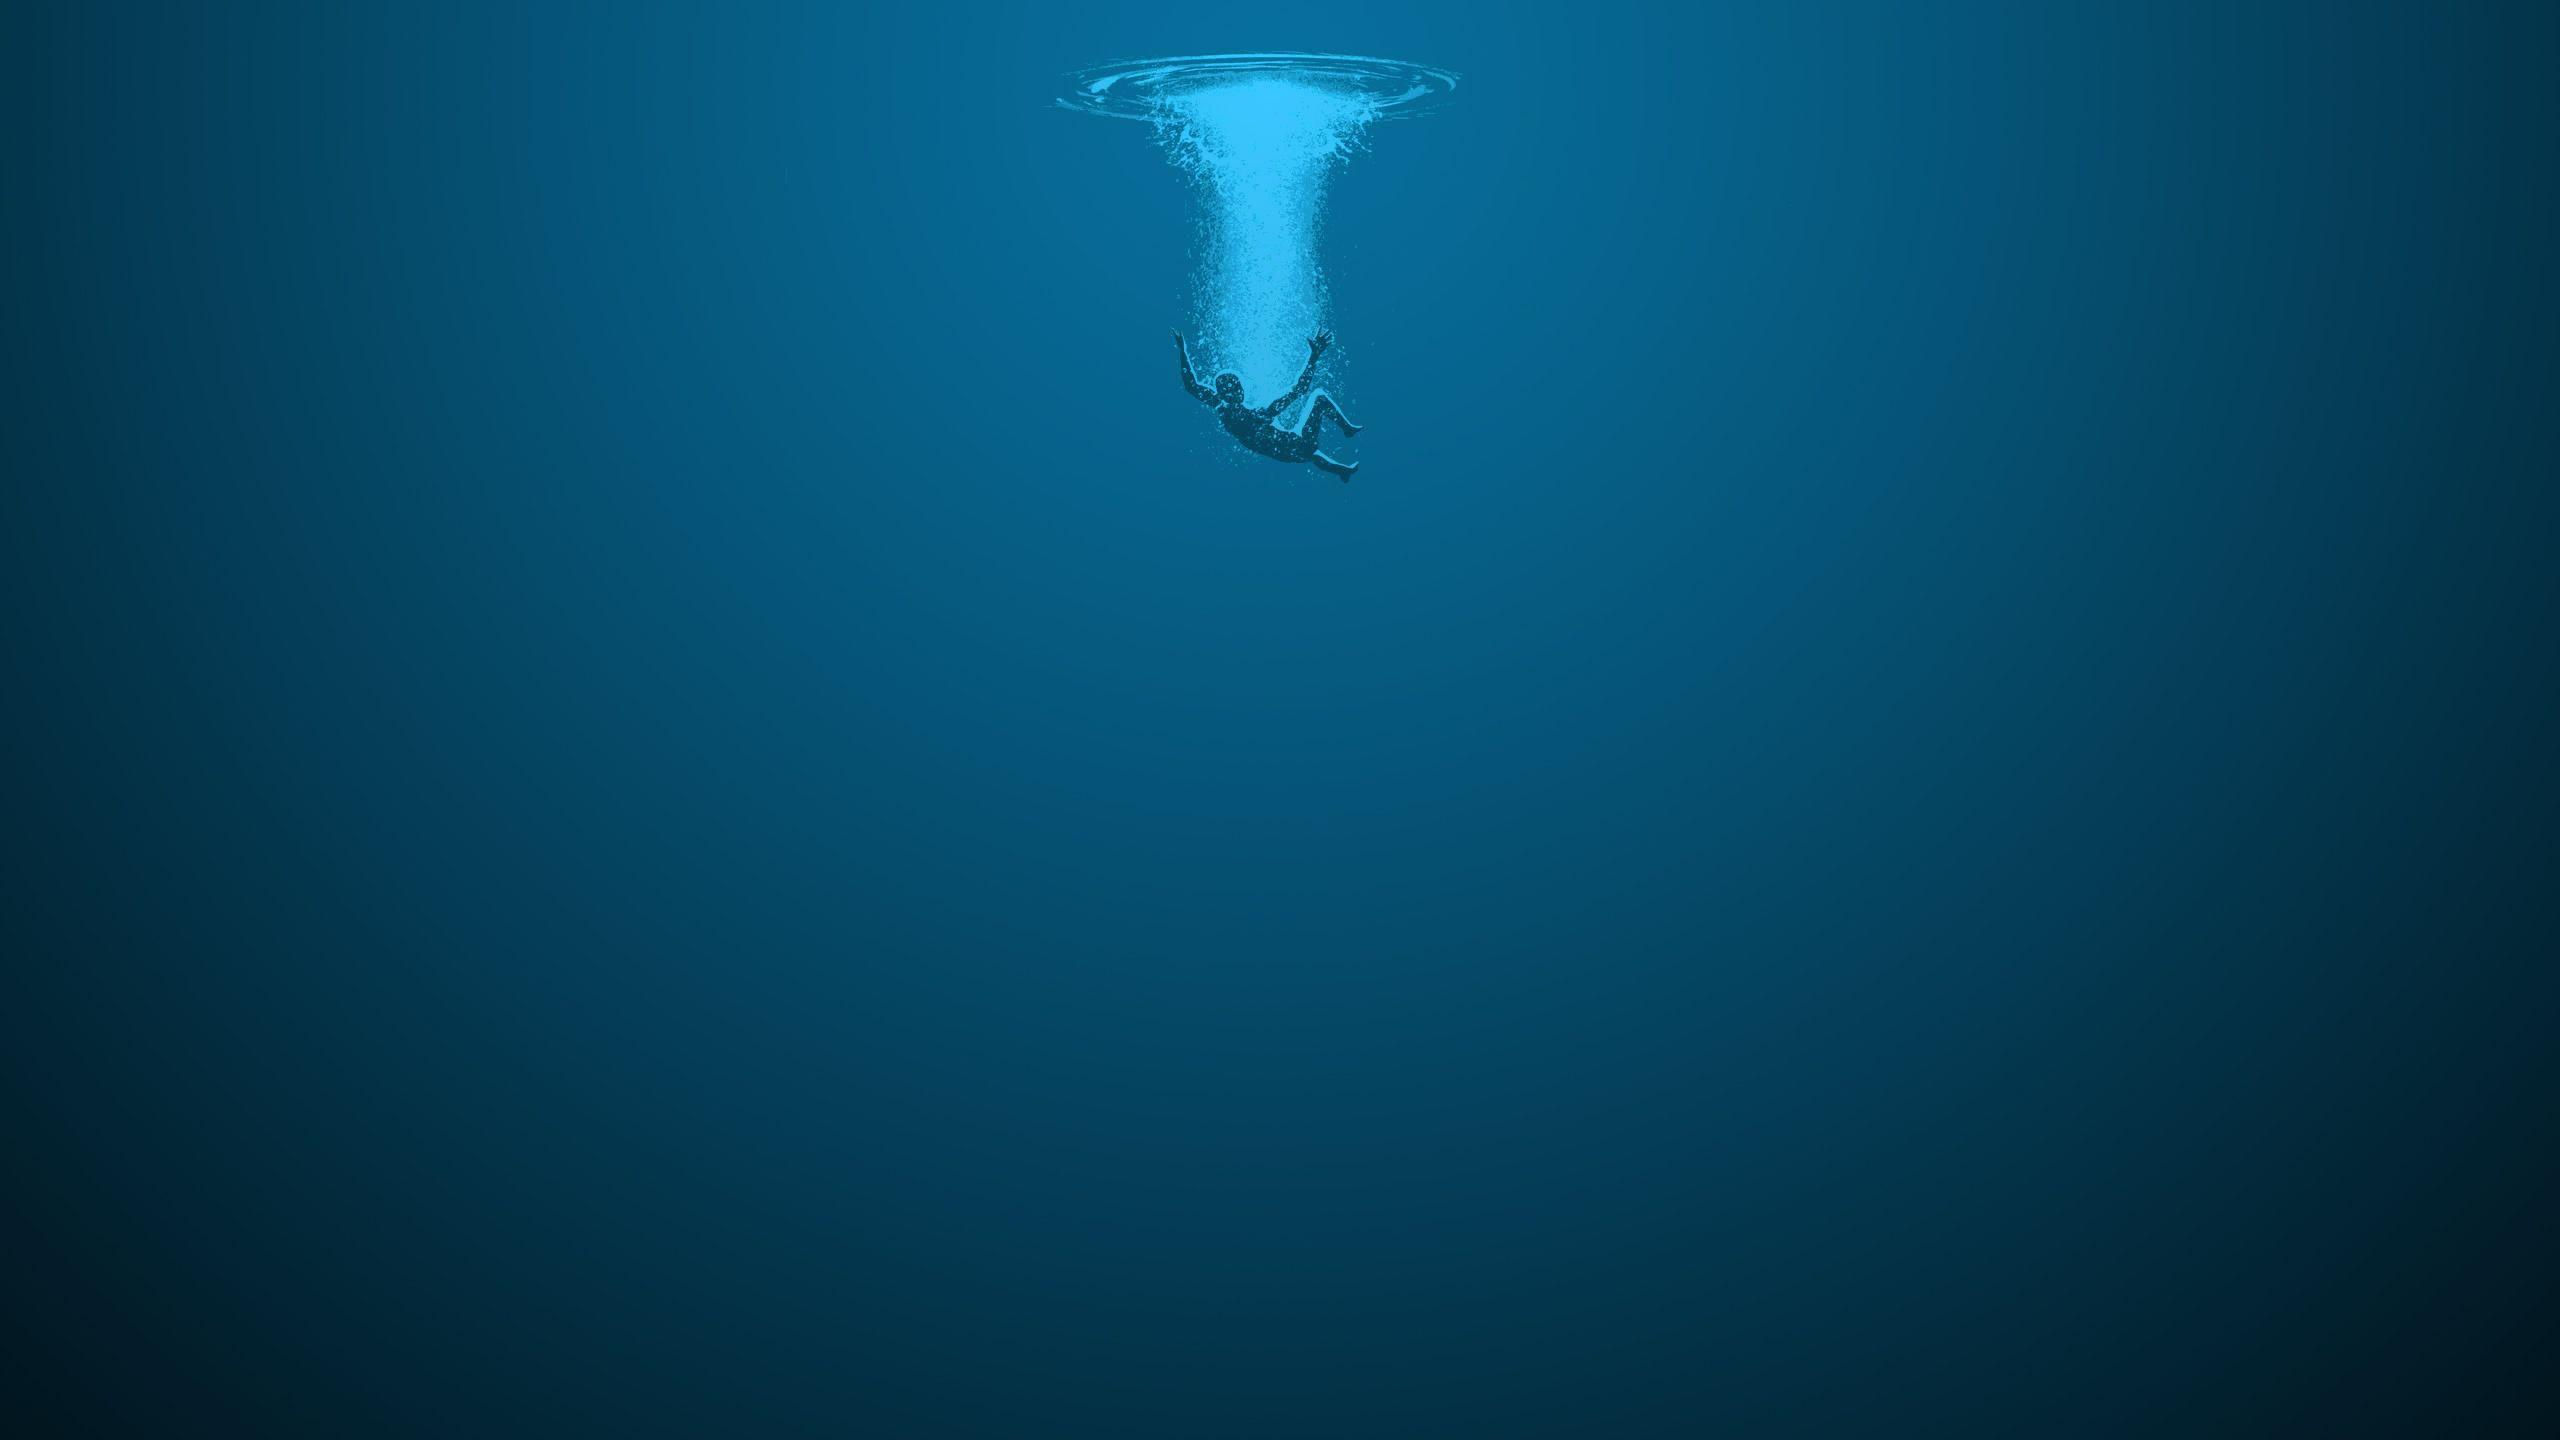 Request Wallpaper of a man plunging into deep sea